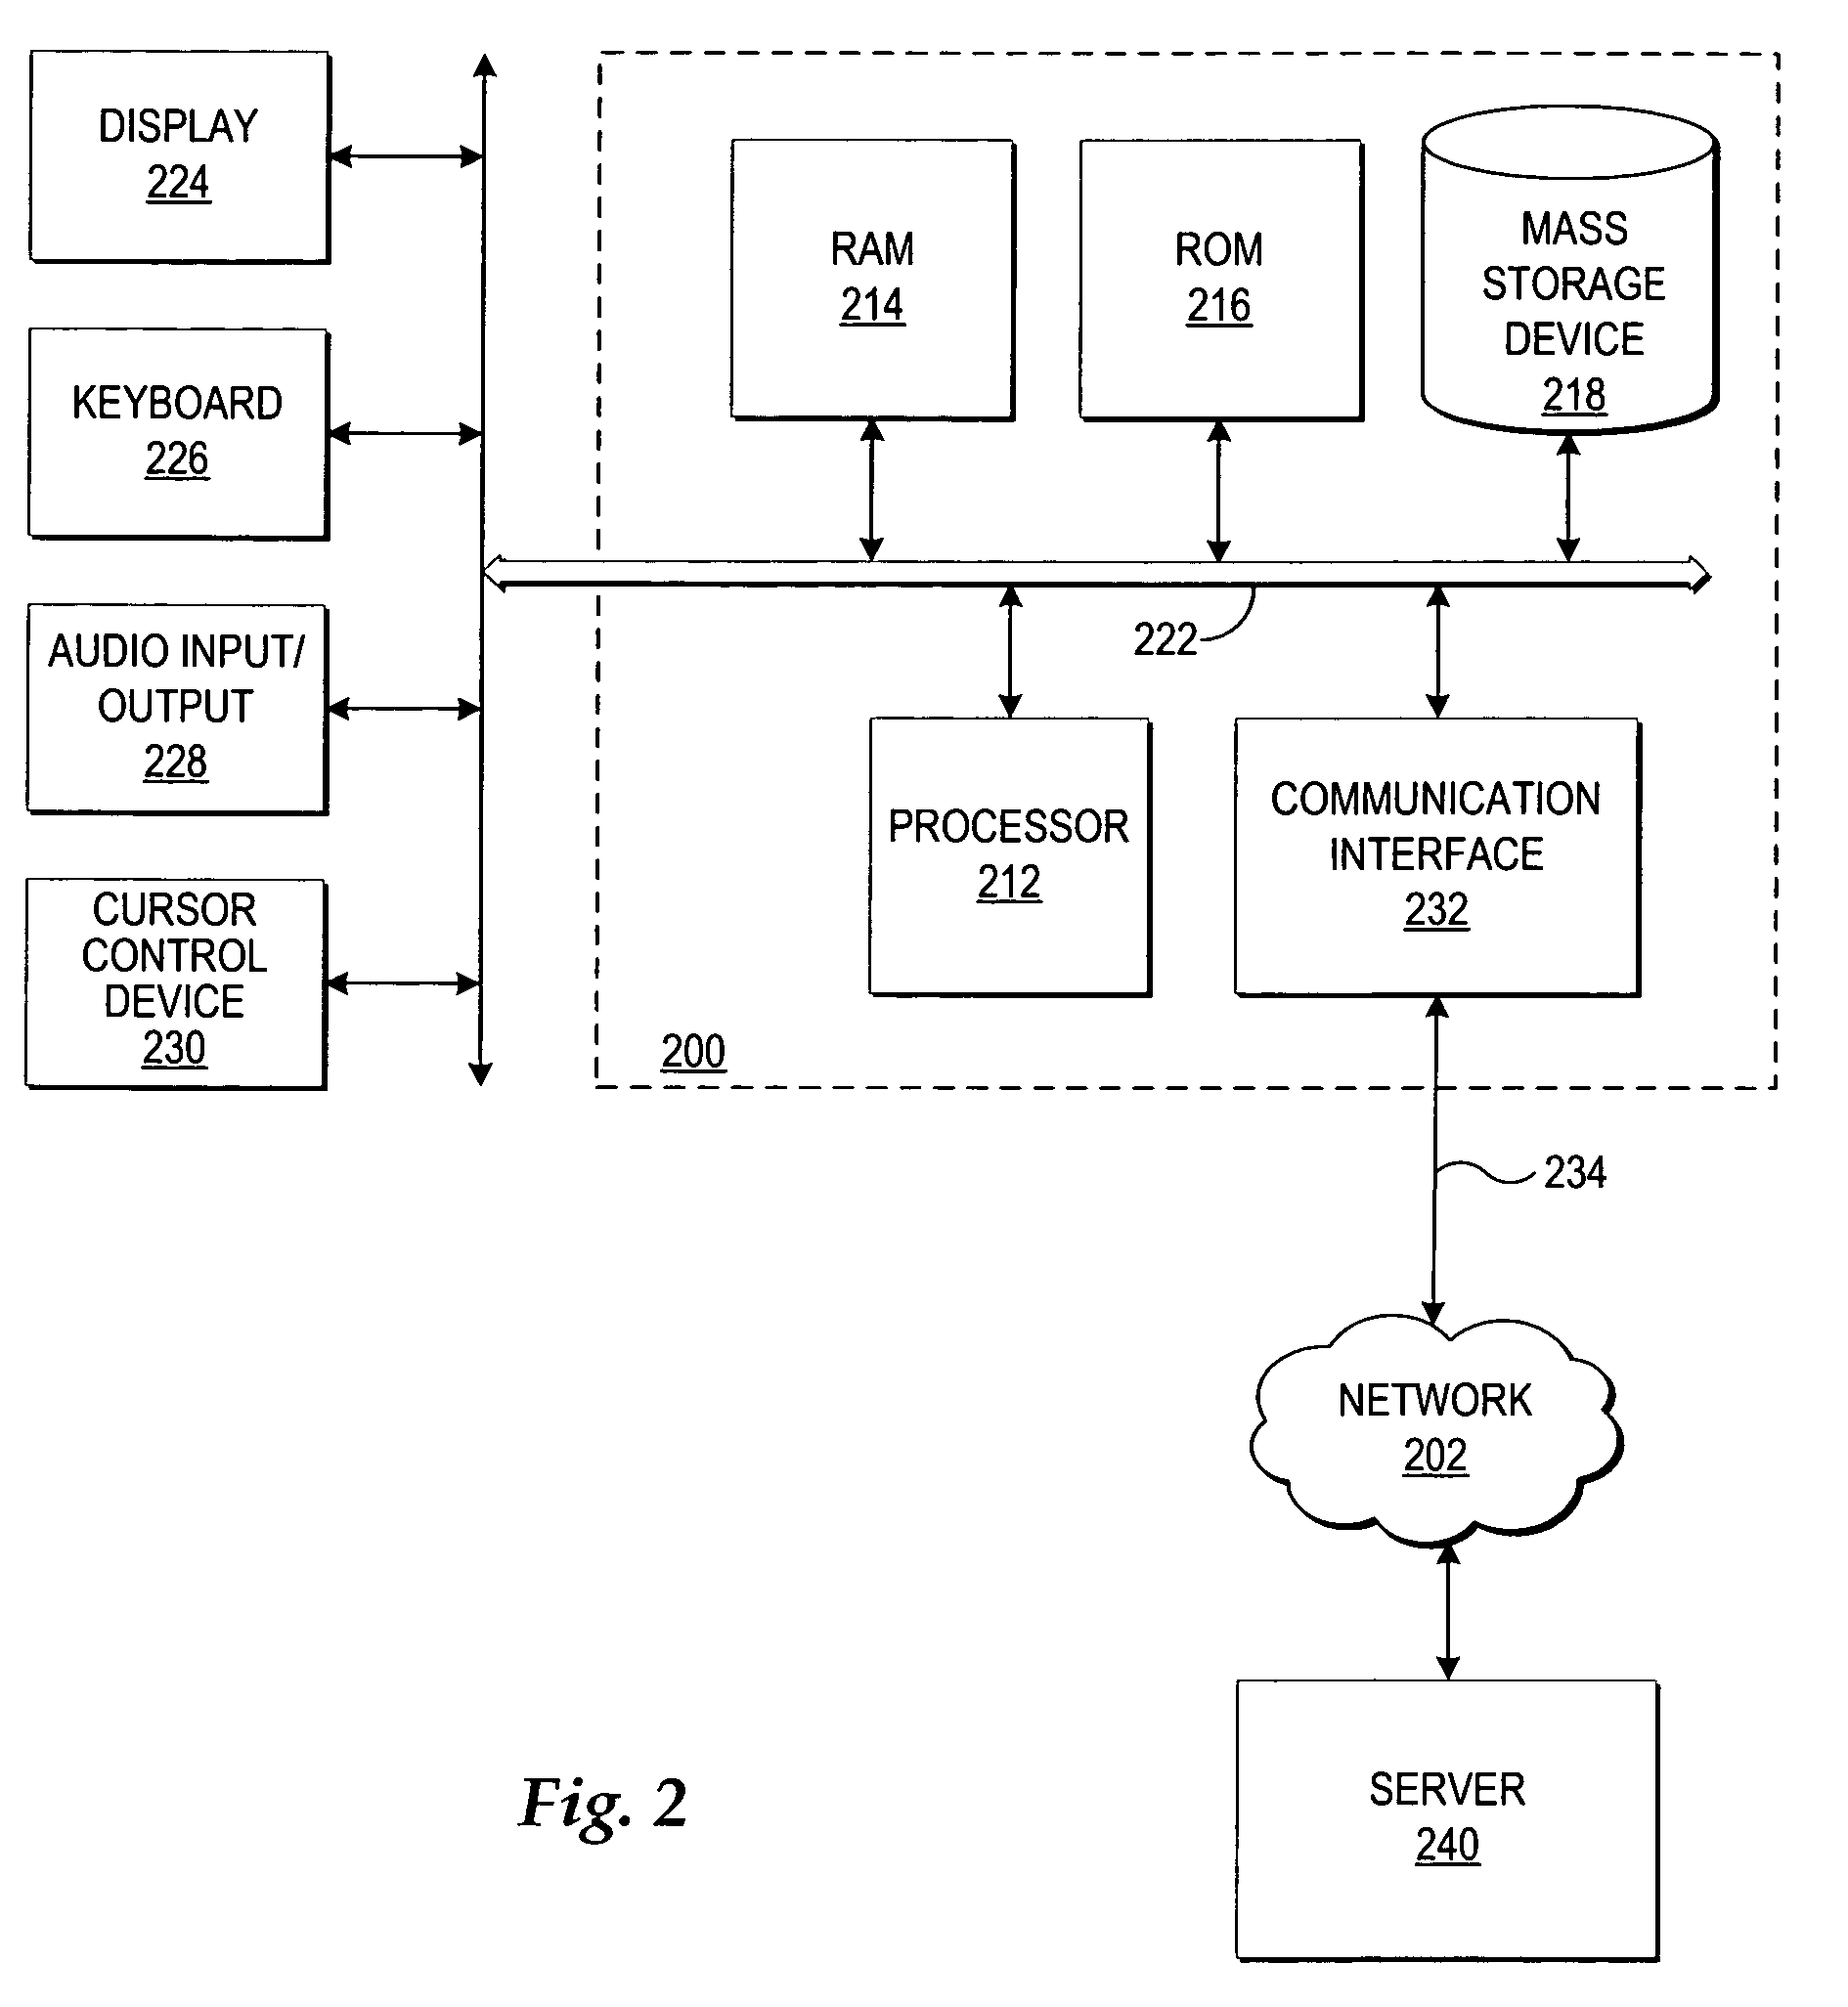 Security screening of electronic devices by device-reported data